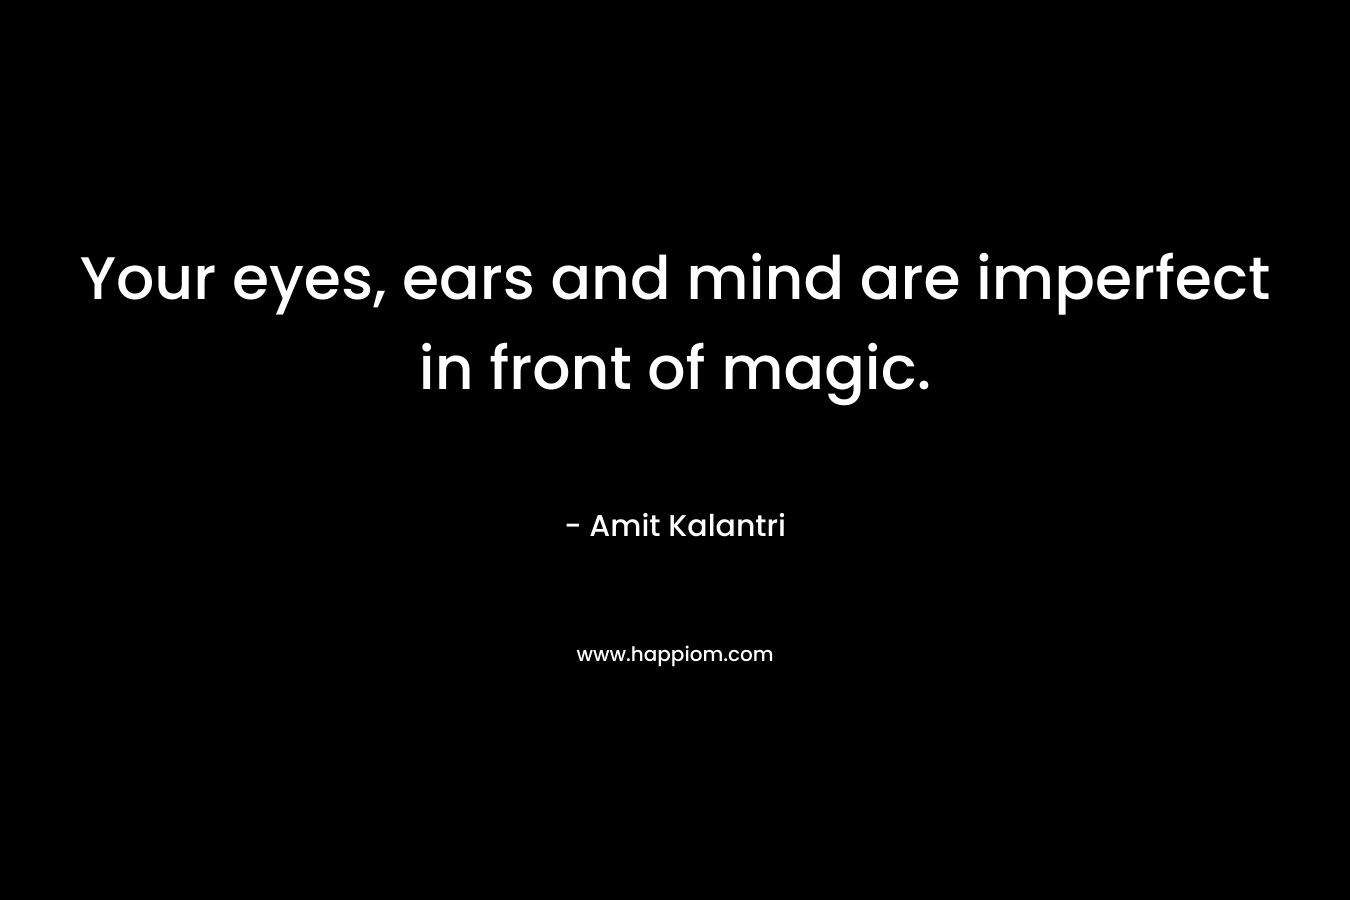 Your eyes, ears and mind are imperfect in front of magic.